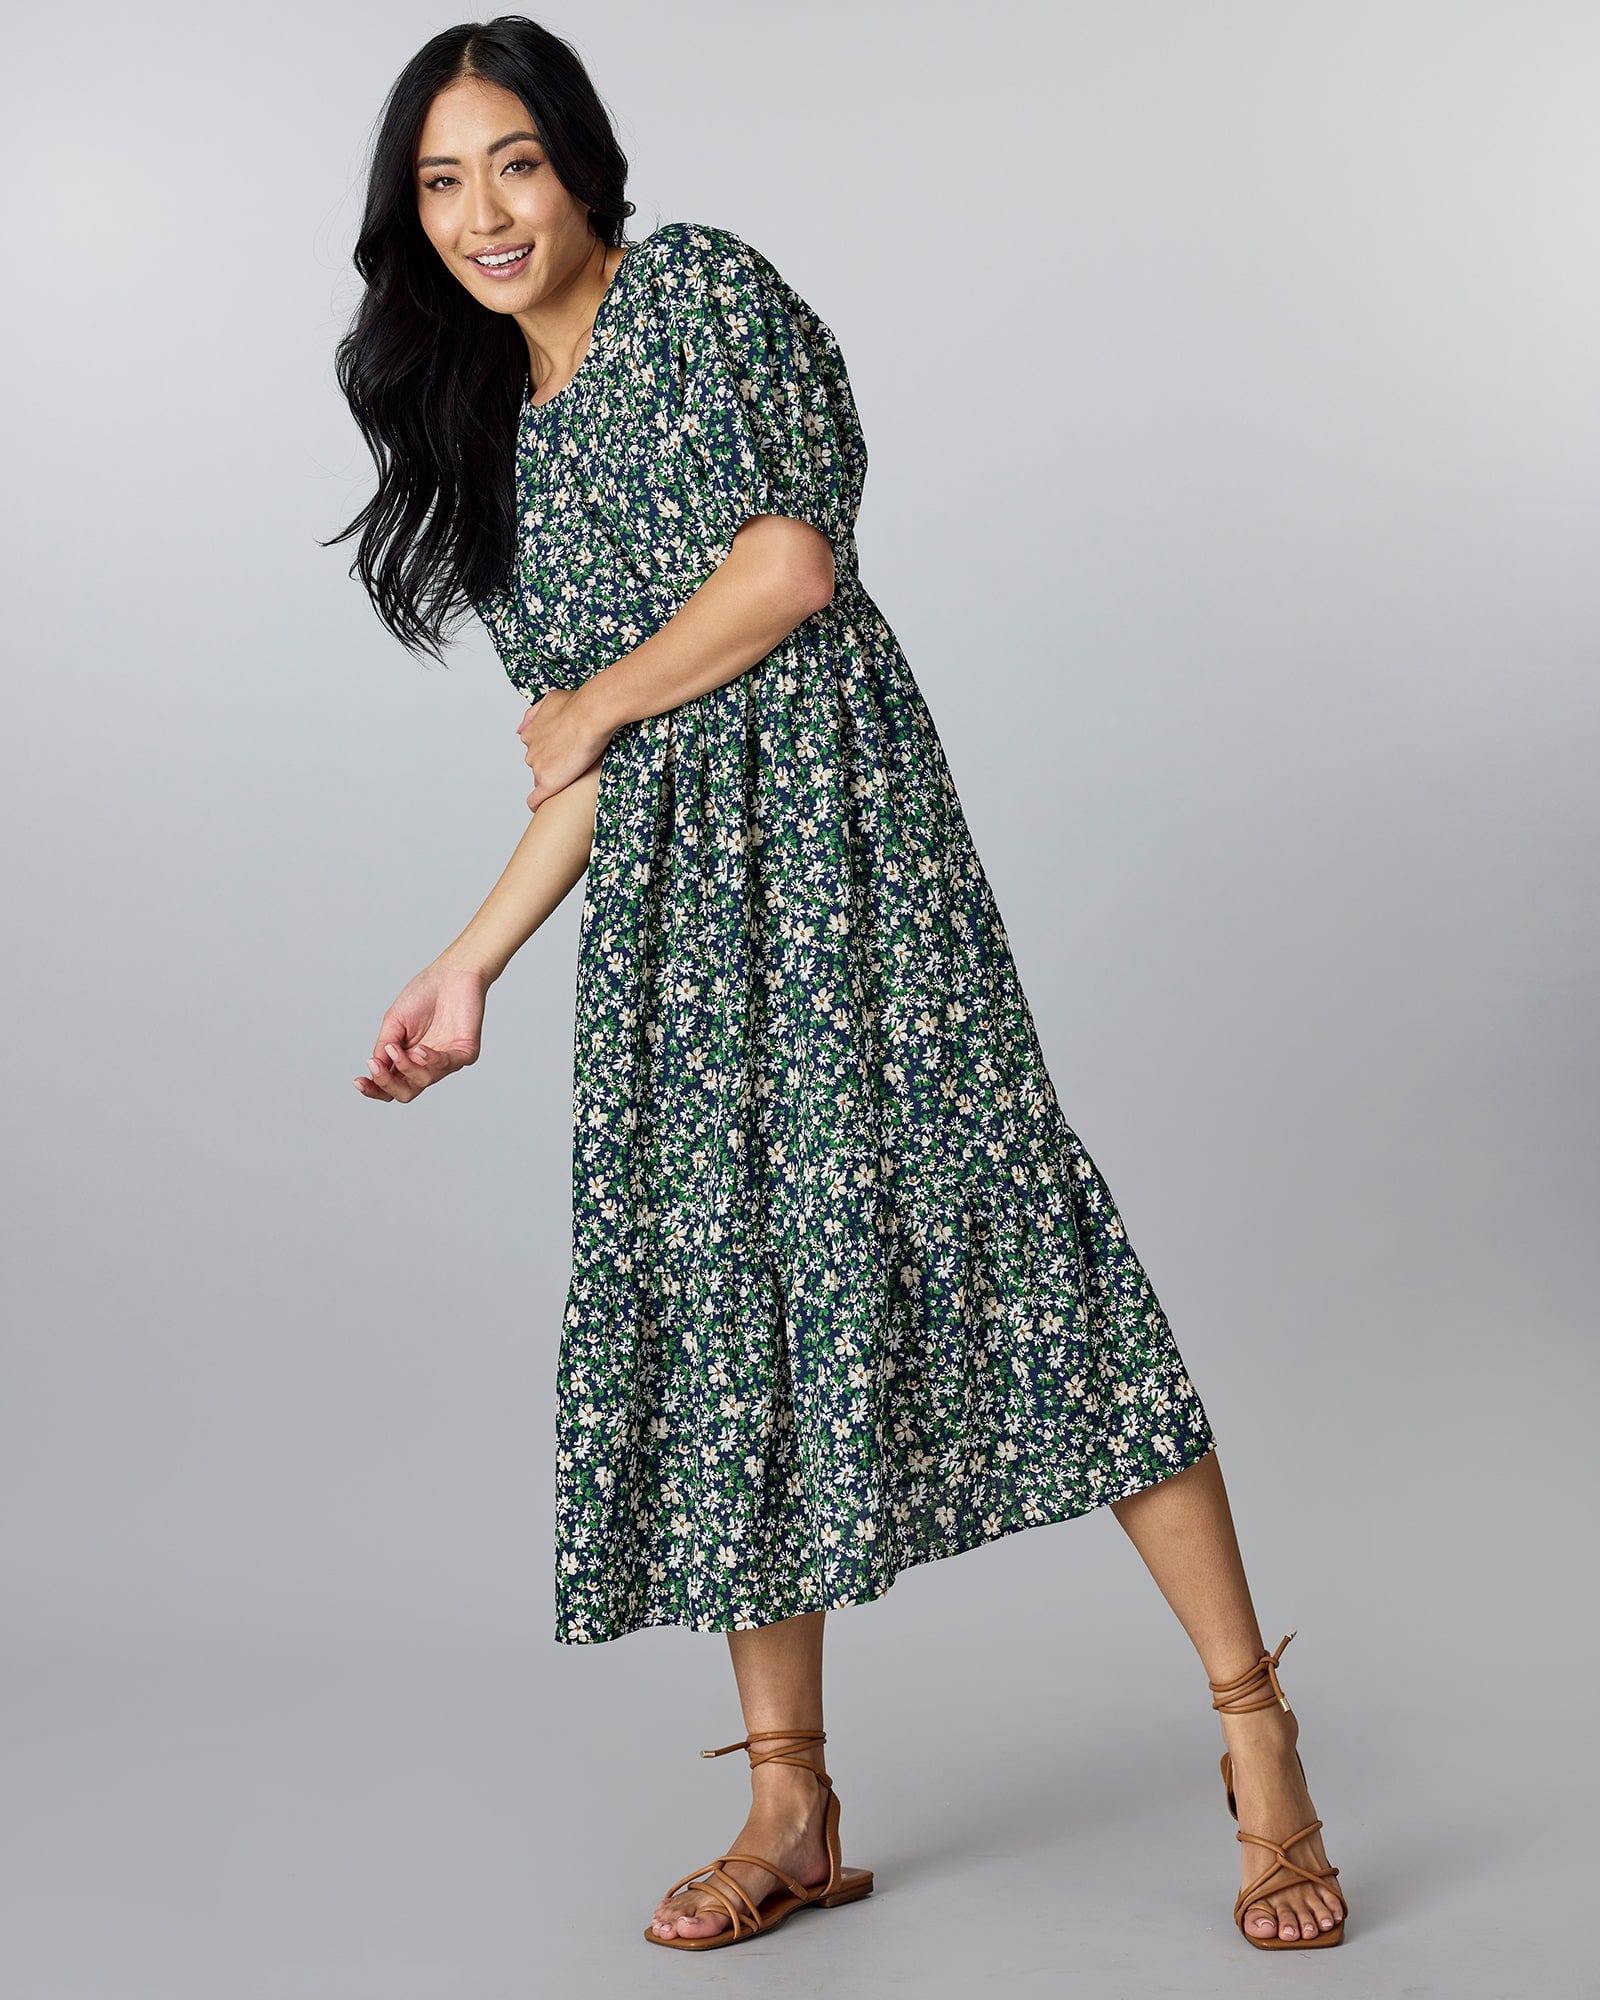 Woman in a blue and green floral, short sleeved, midi-length dress.